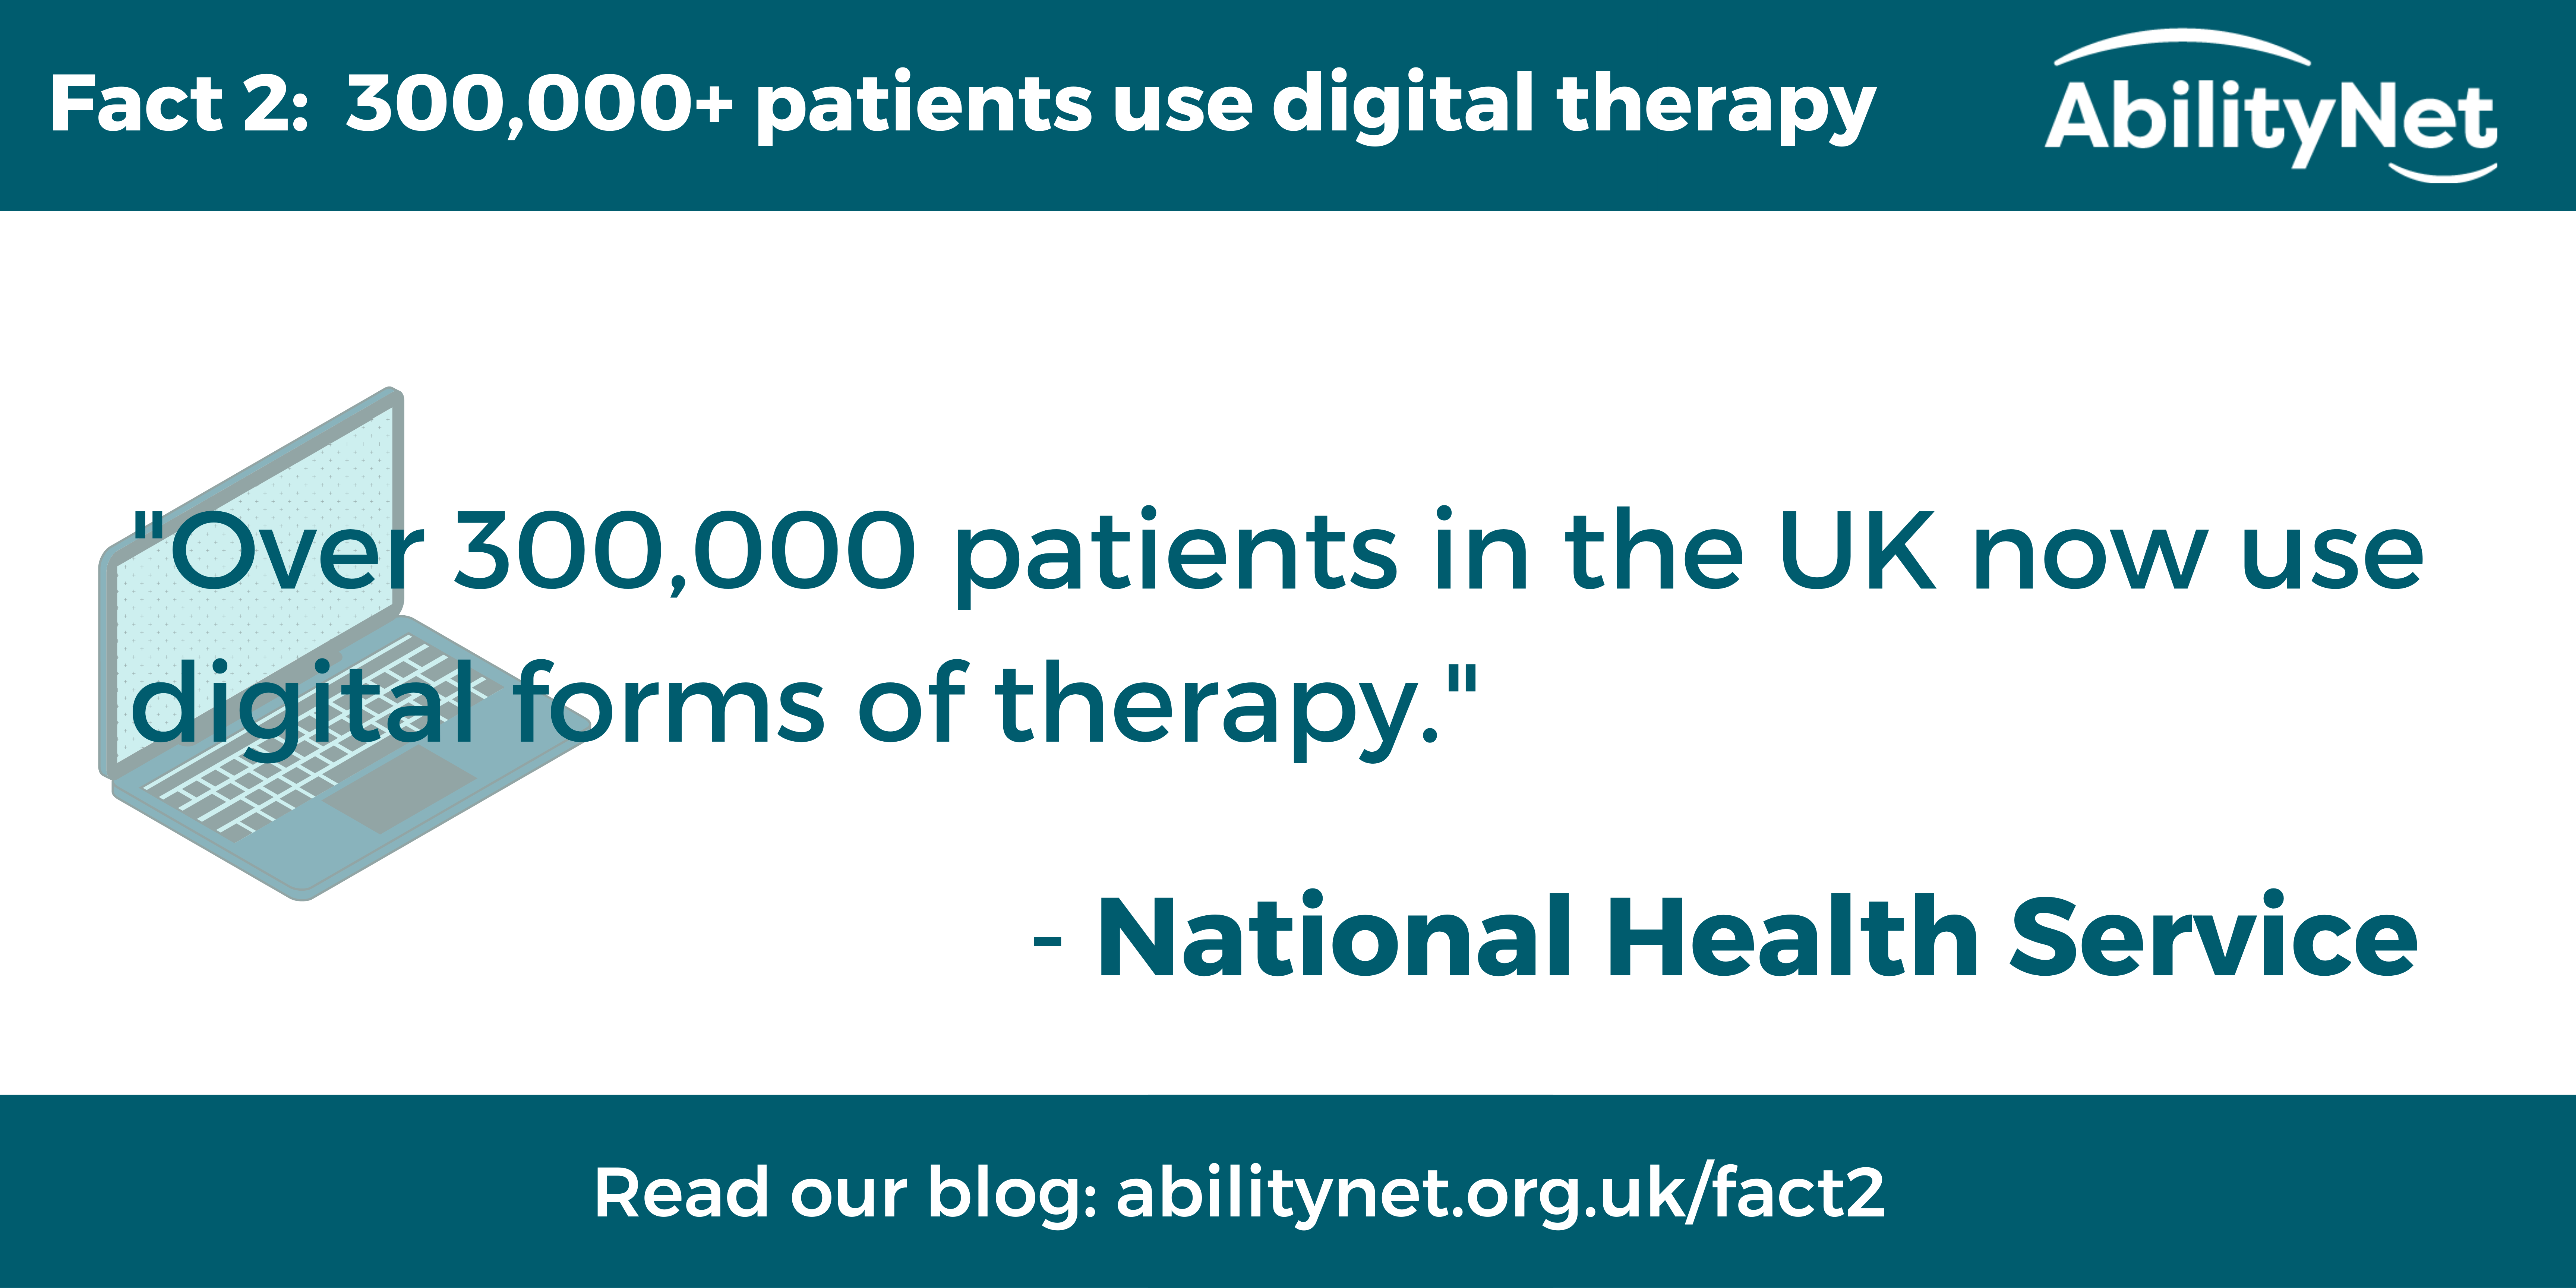 Fact 2:  300,000+ patients use digital therapy "Over 300,000 patients in the UK now use digital forms of therapy." - National Health Service Read our blog: abilitynet.org.uk/fact2